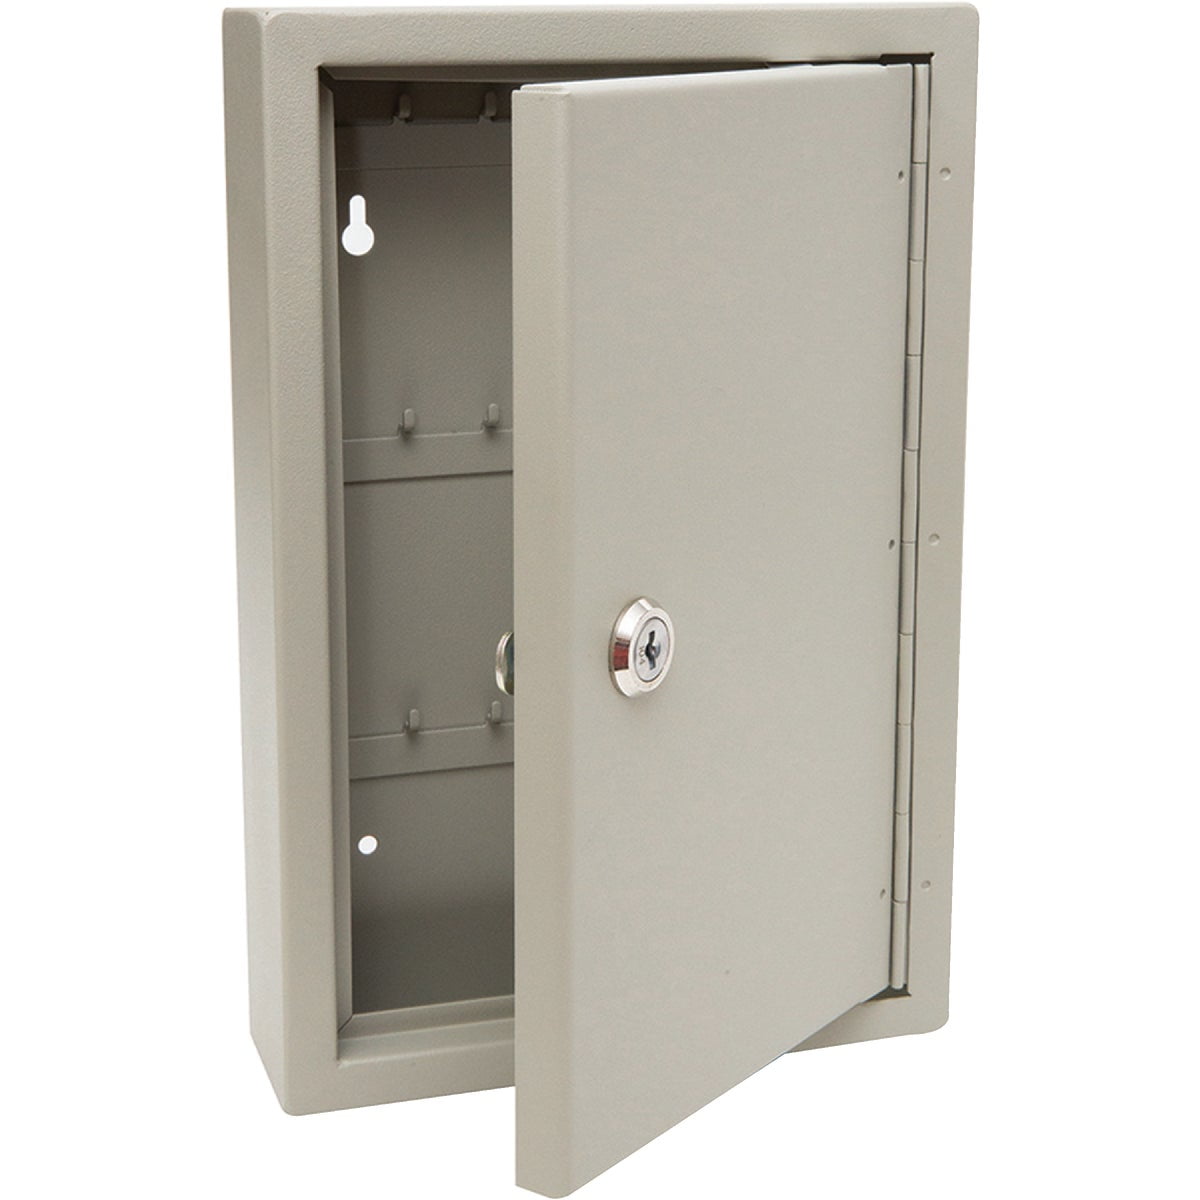 Key Cabinet Pro, 30 Key Touchpoint